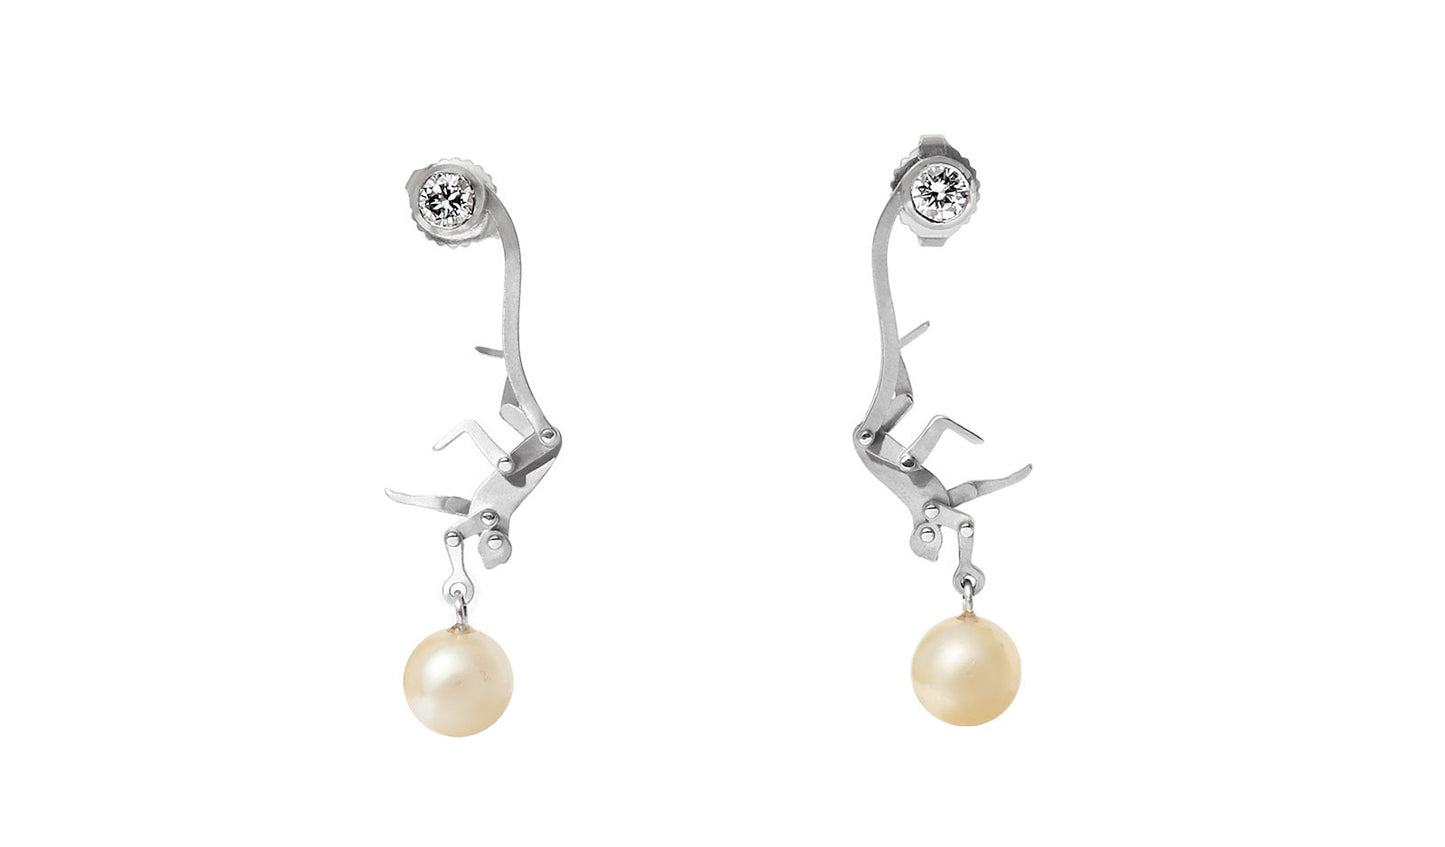 Micro Monkey Drop Earrings | White Gold with Pearls